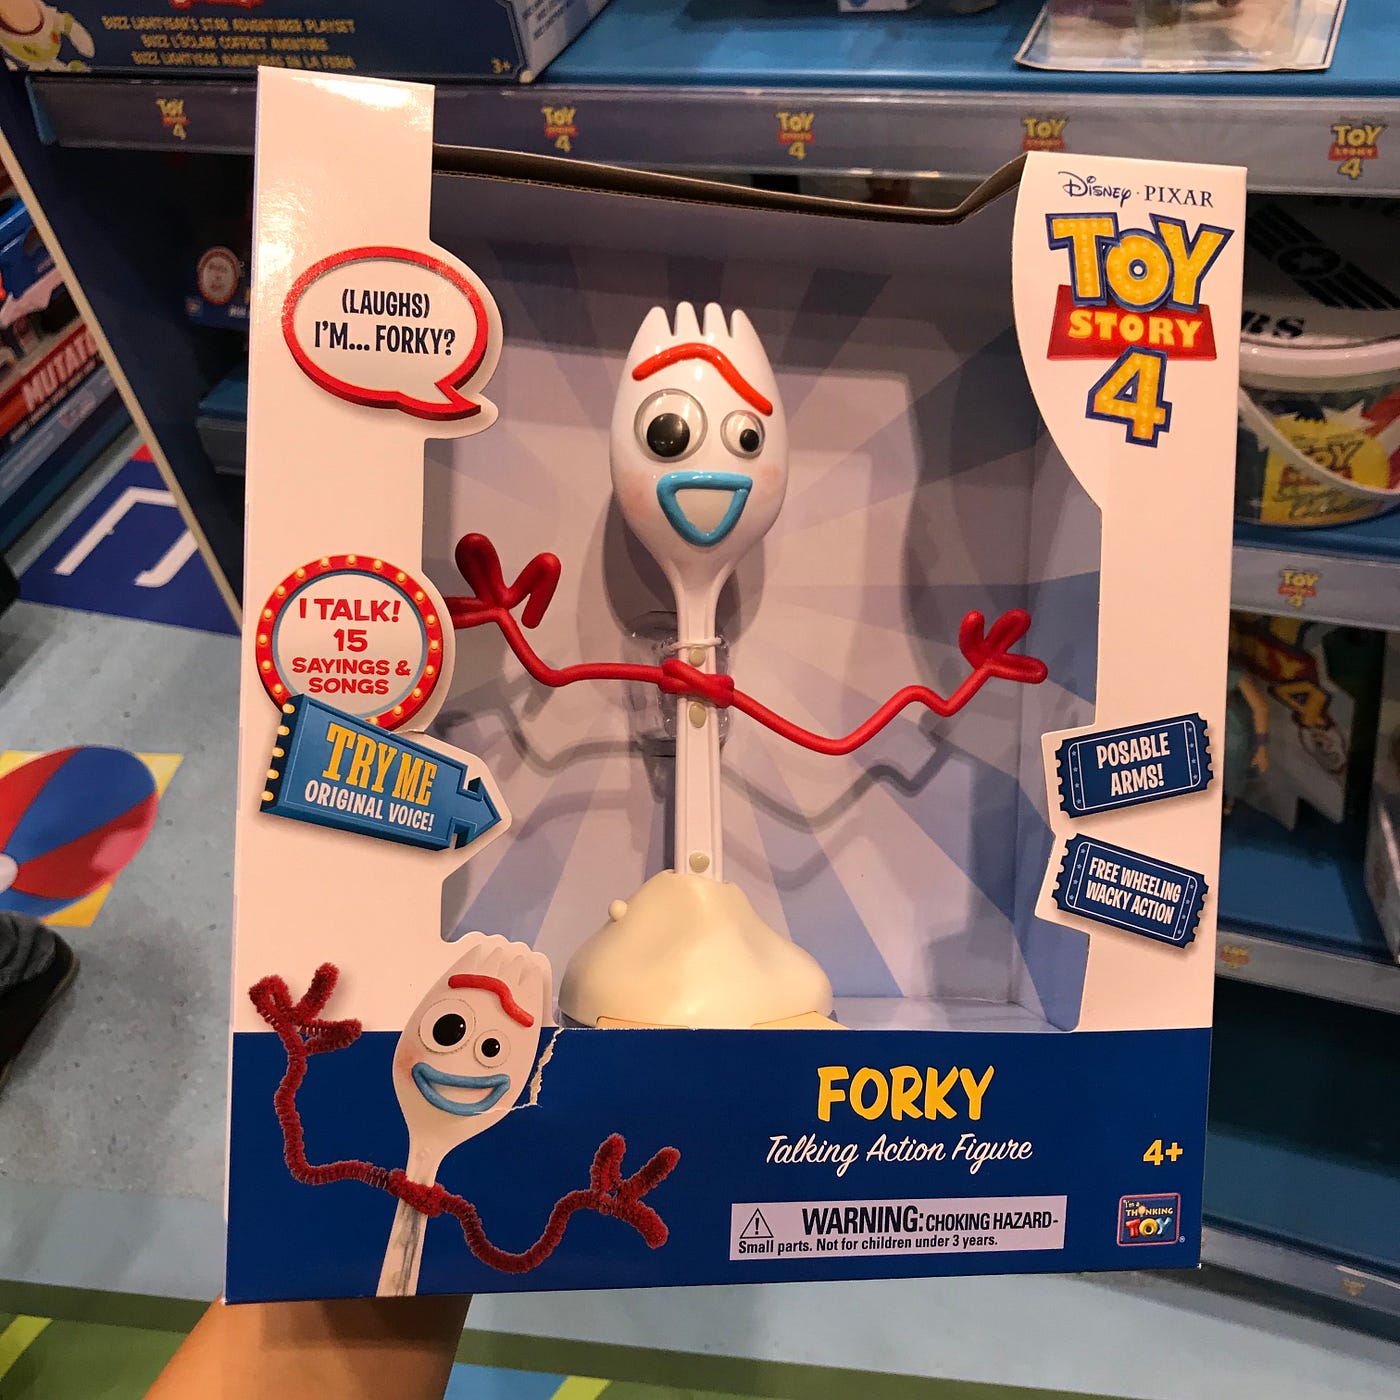 There's only one forky. Watching Toy Story 3 again, while…, by Safi Roshdy